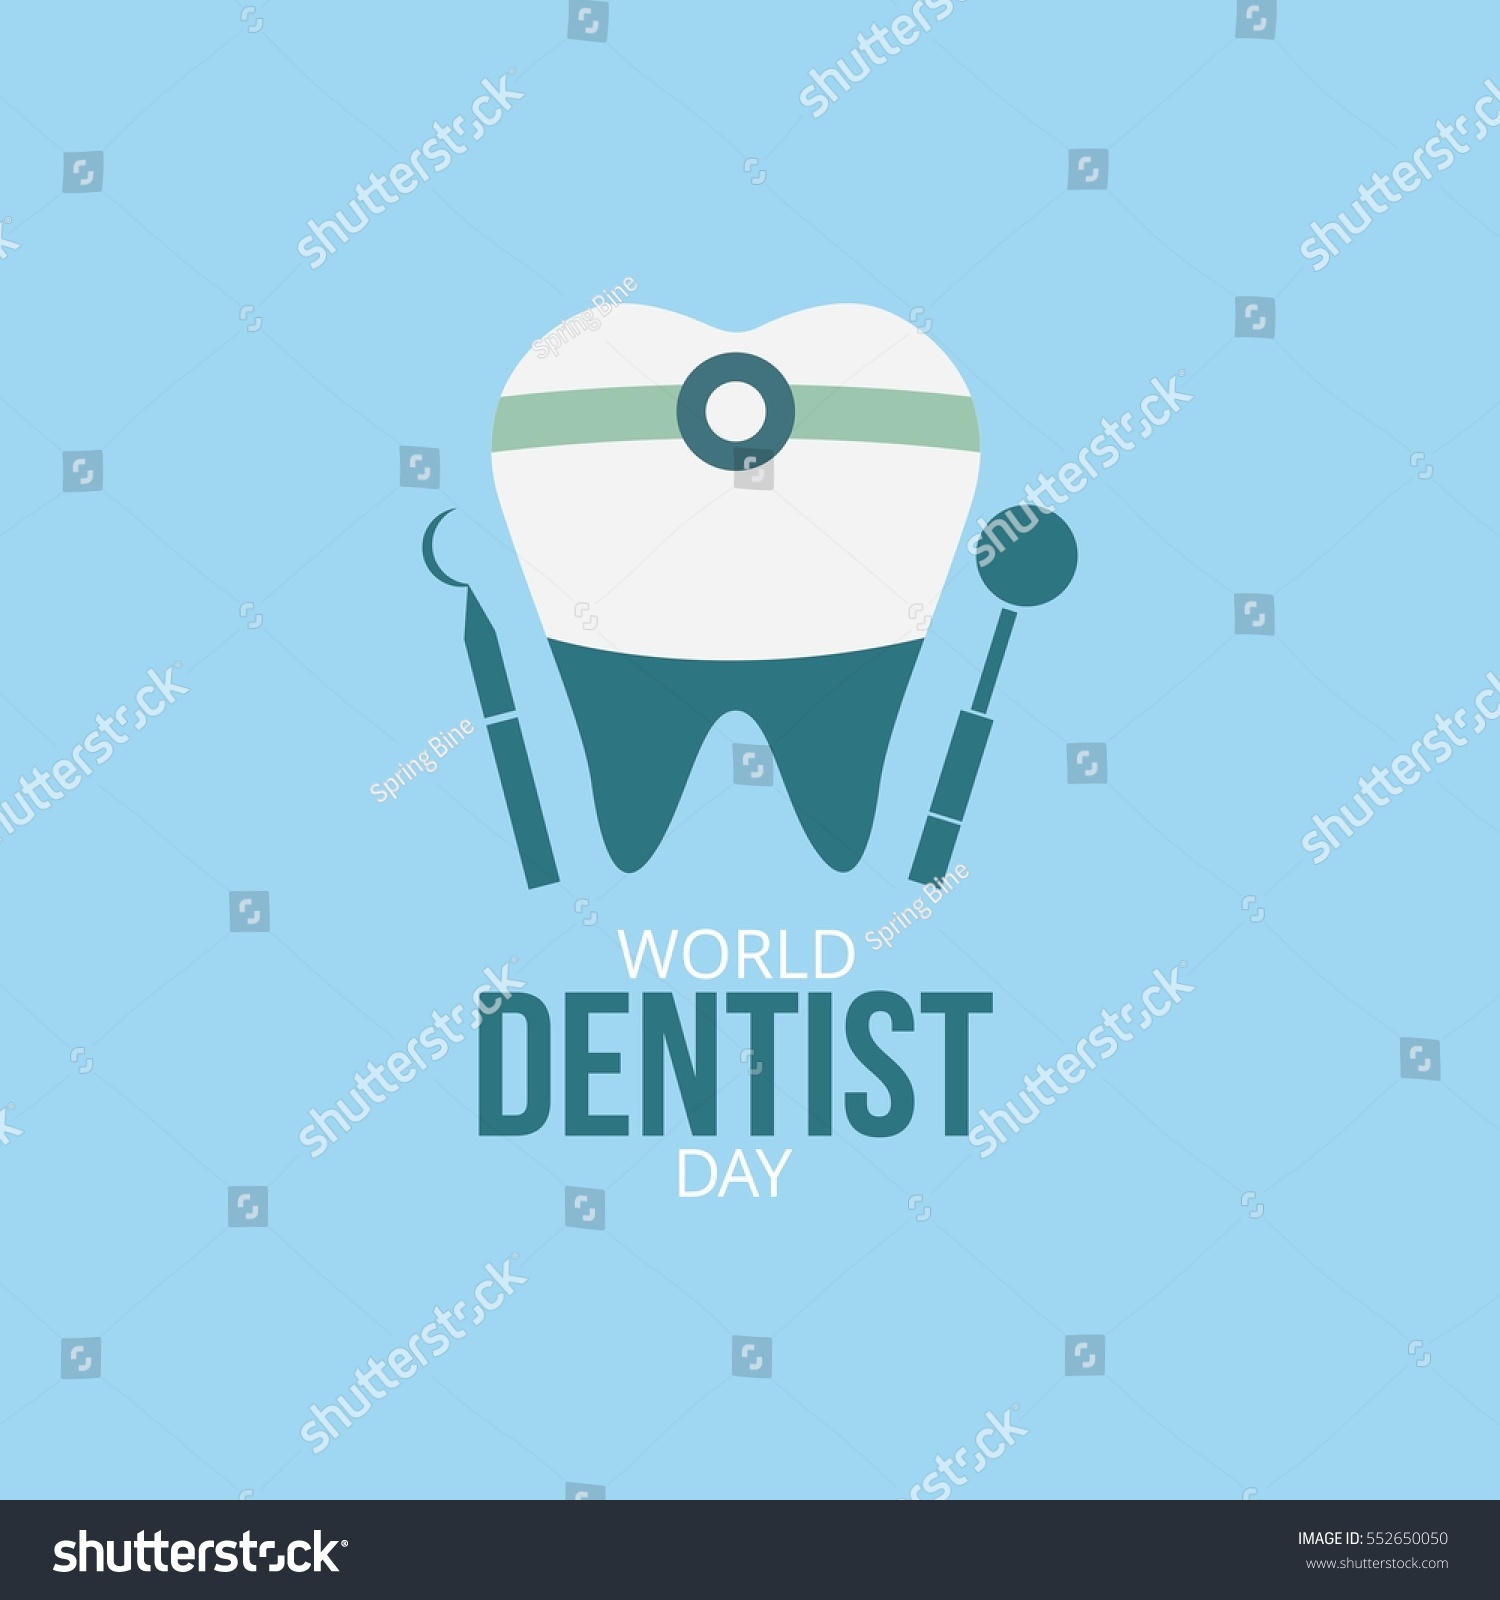 World Dentist Day Campaign Vector Illustration Stock Vector (Royalty